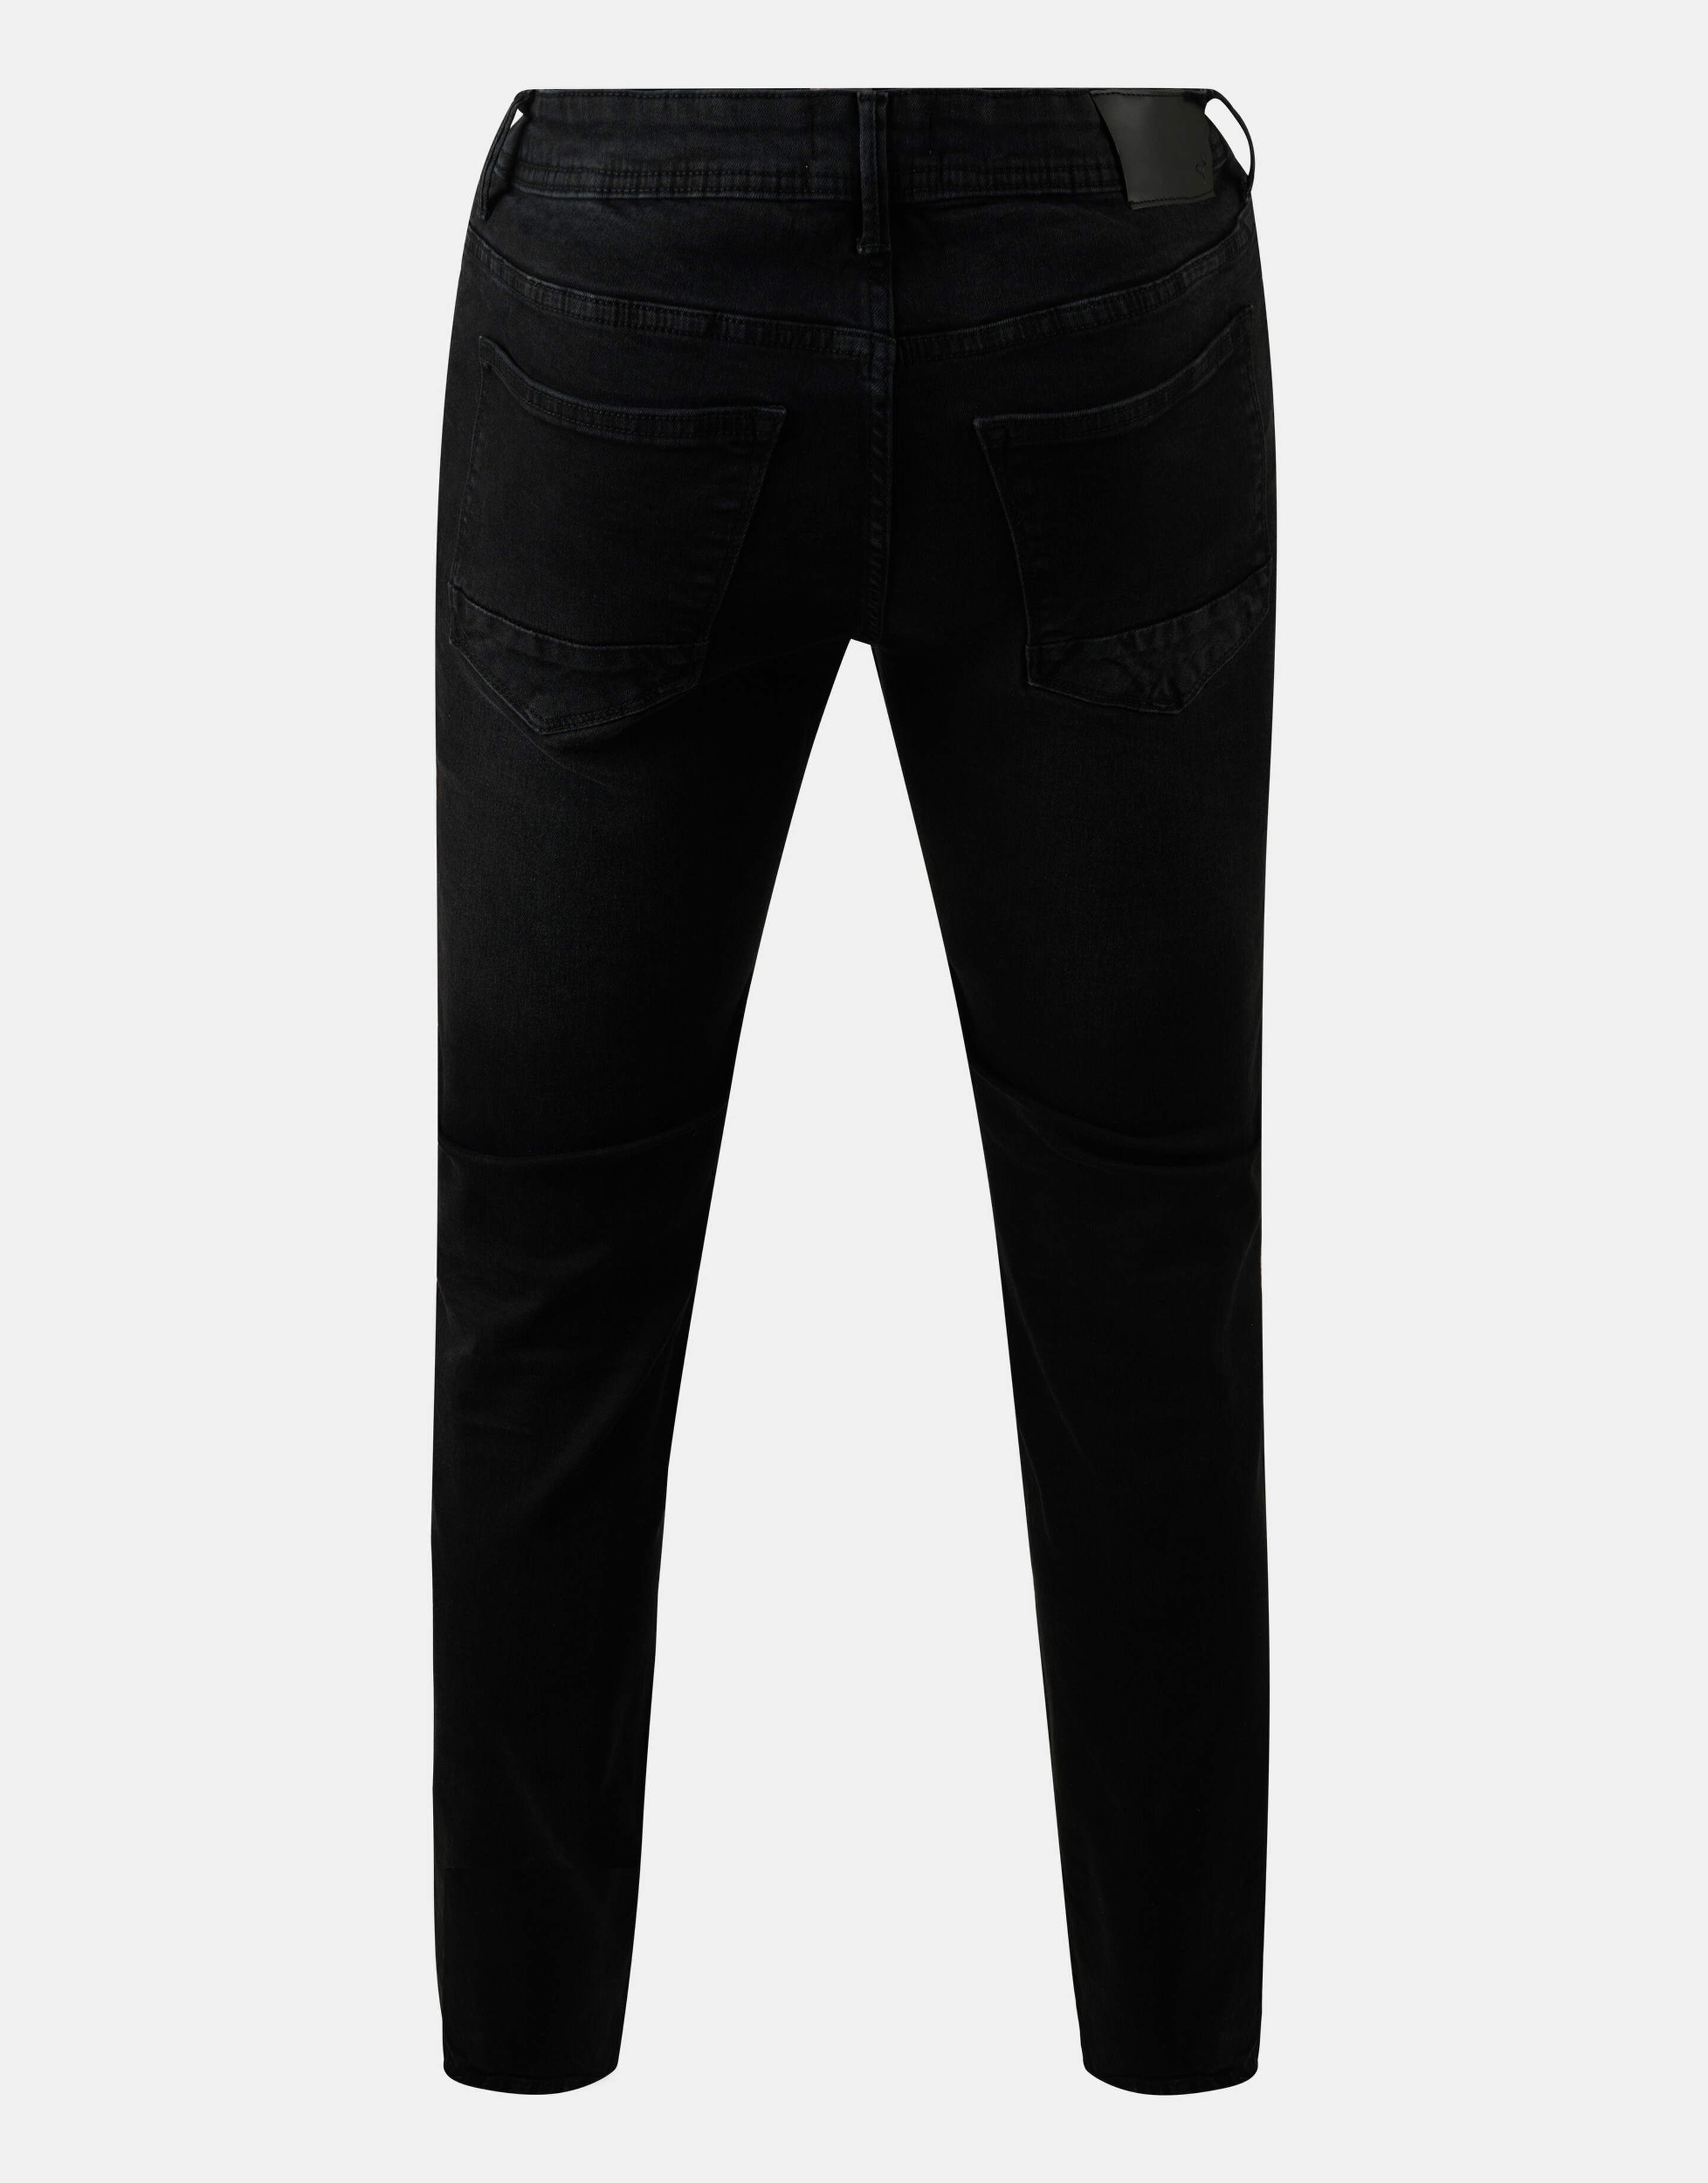 Lewis Straight Washed Black Jeans L32 Refill